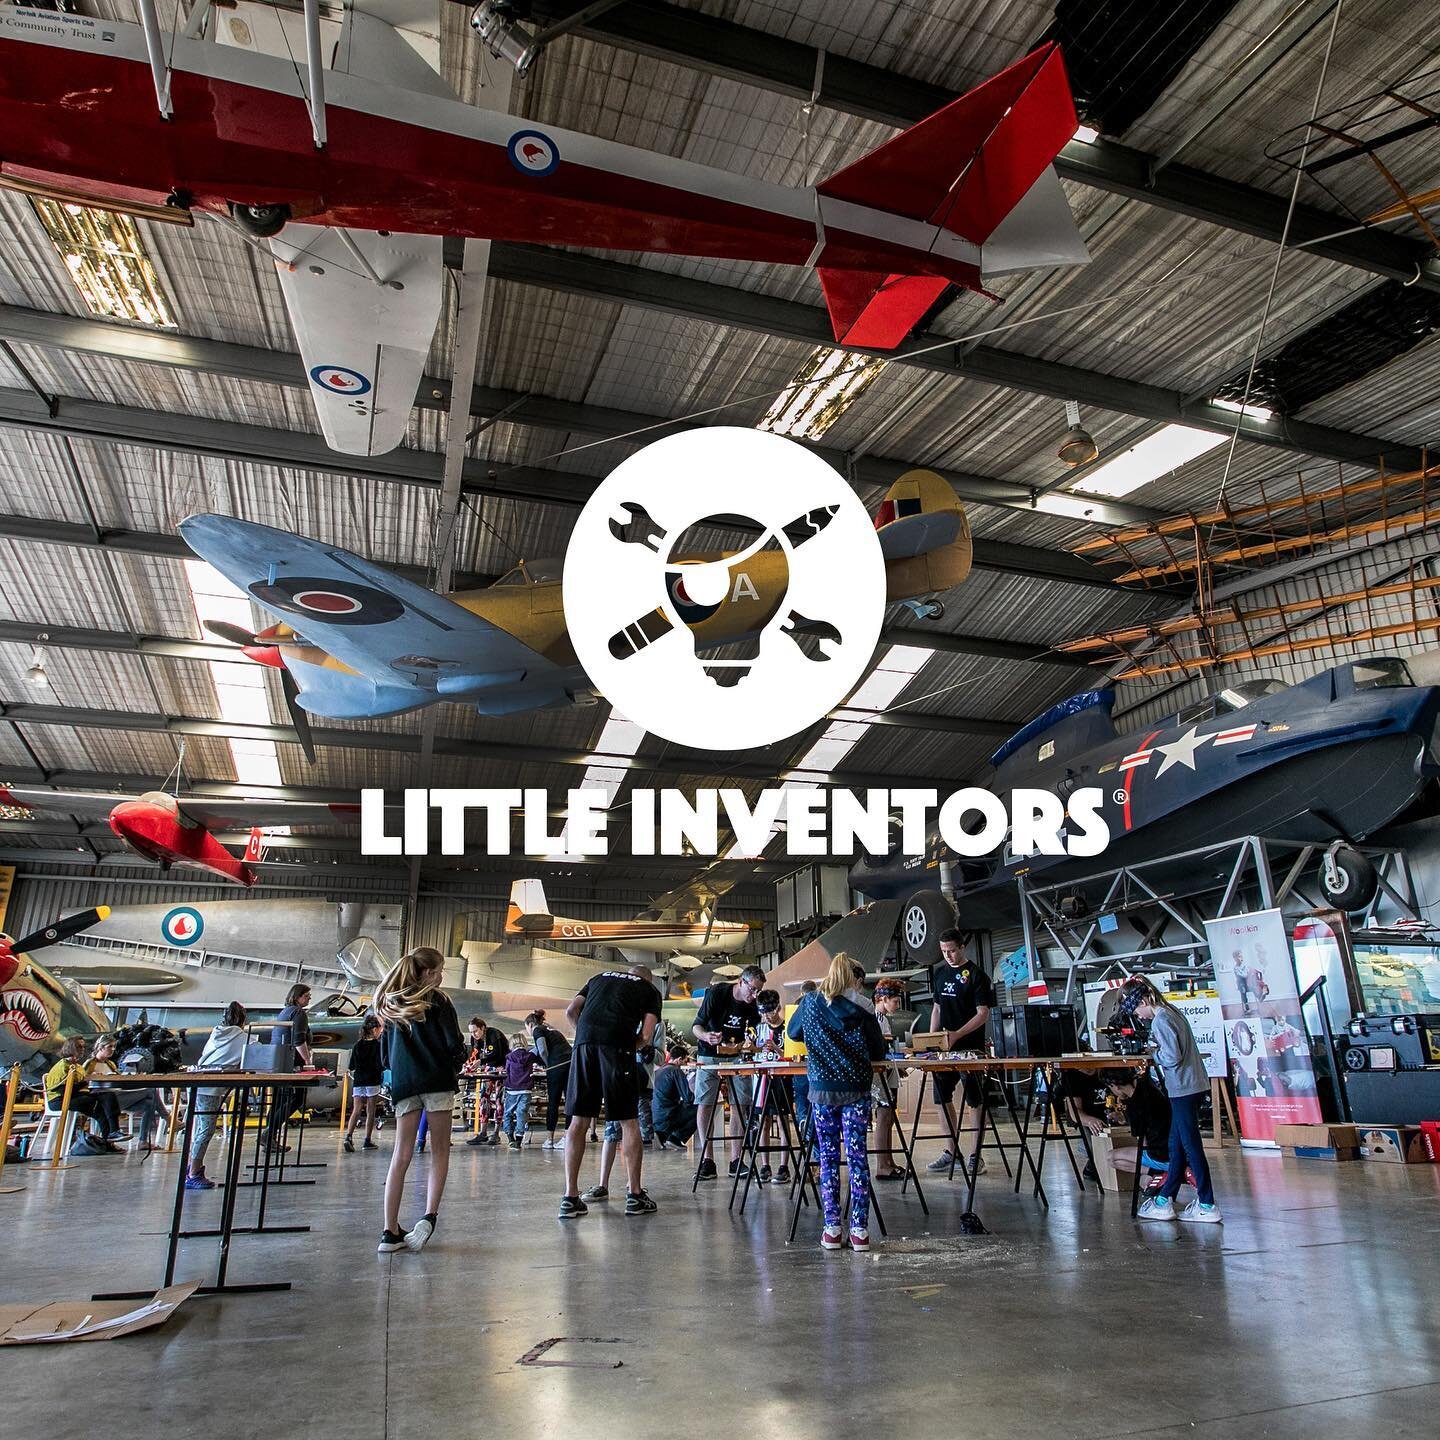 Little Inventors was dreamed up with the goal to engage kids in all the fun that comes from problem solving and creativity, and provide an environment where they can explore their own potential as innovative thinkers and creators. We had 90 kids aged